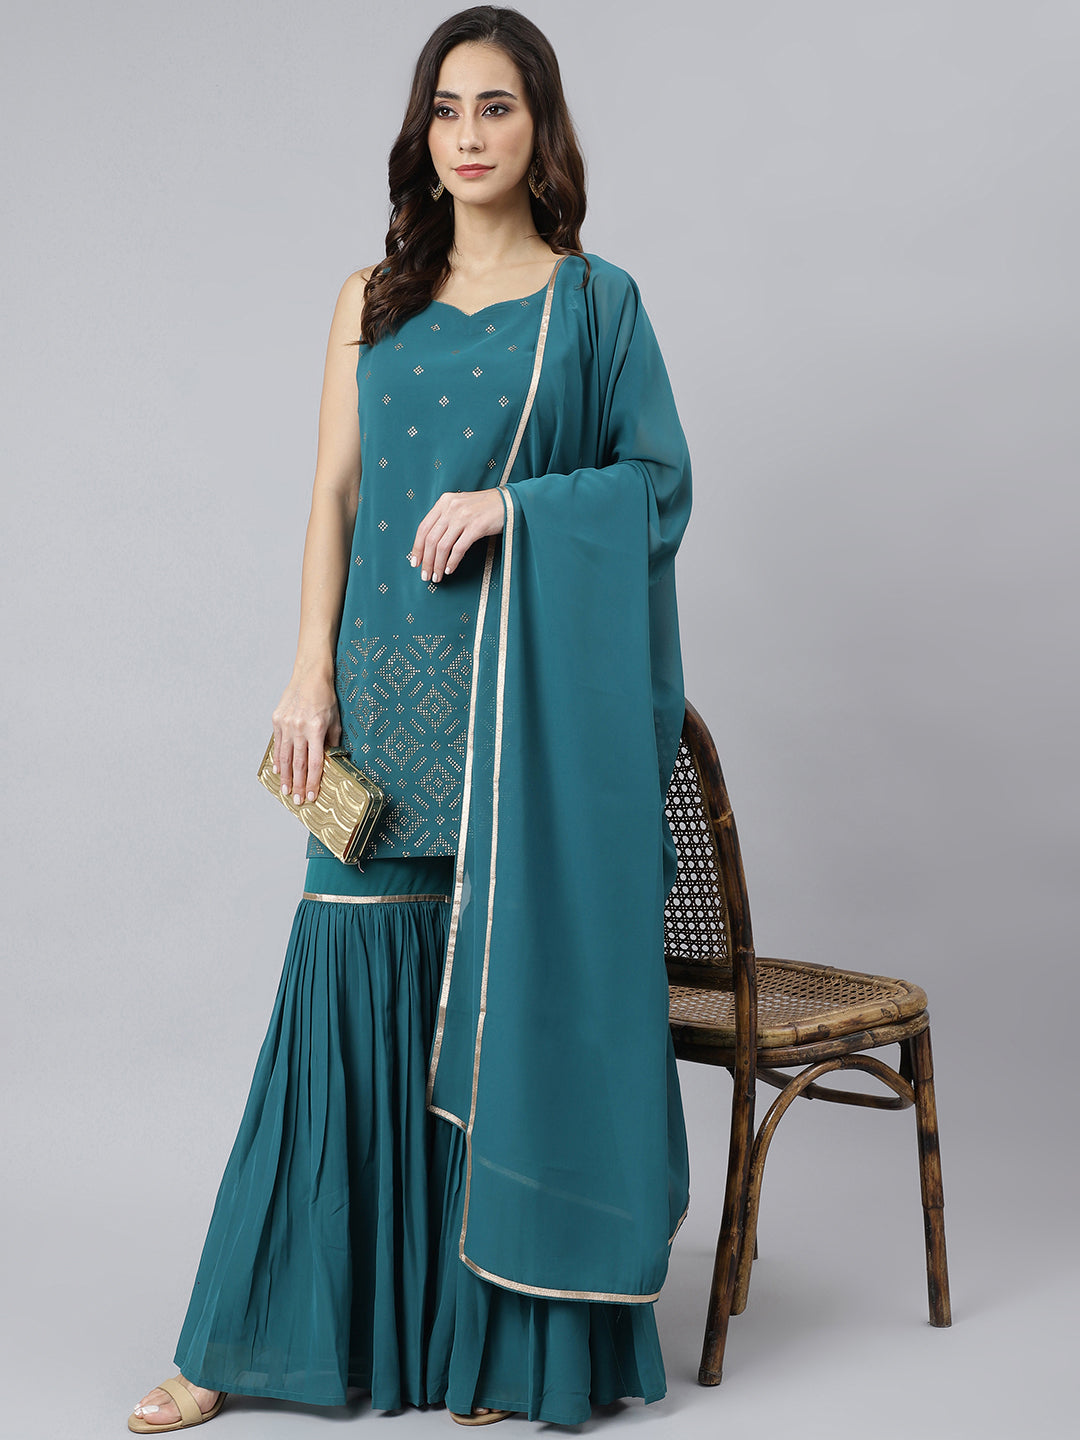 Teal Georgette Embossed Gold Print Top with Gharara and Dupatta